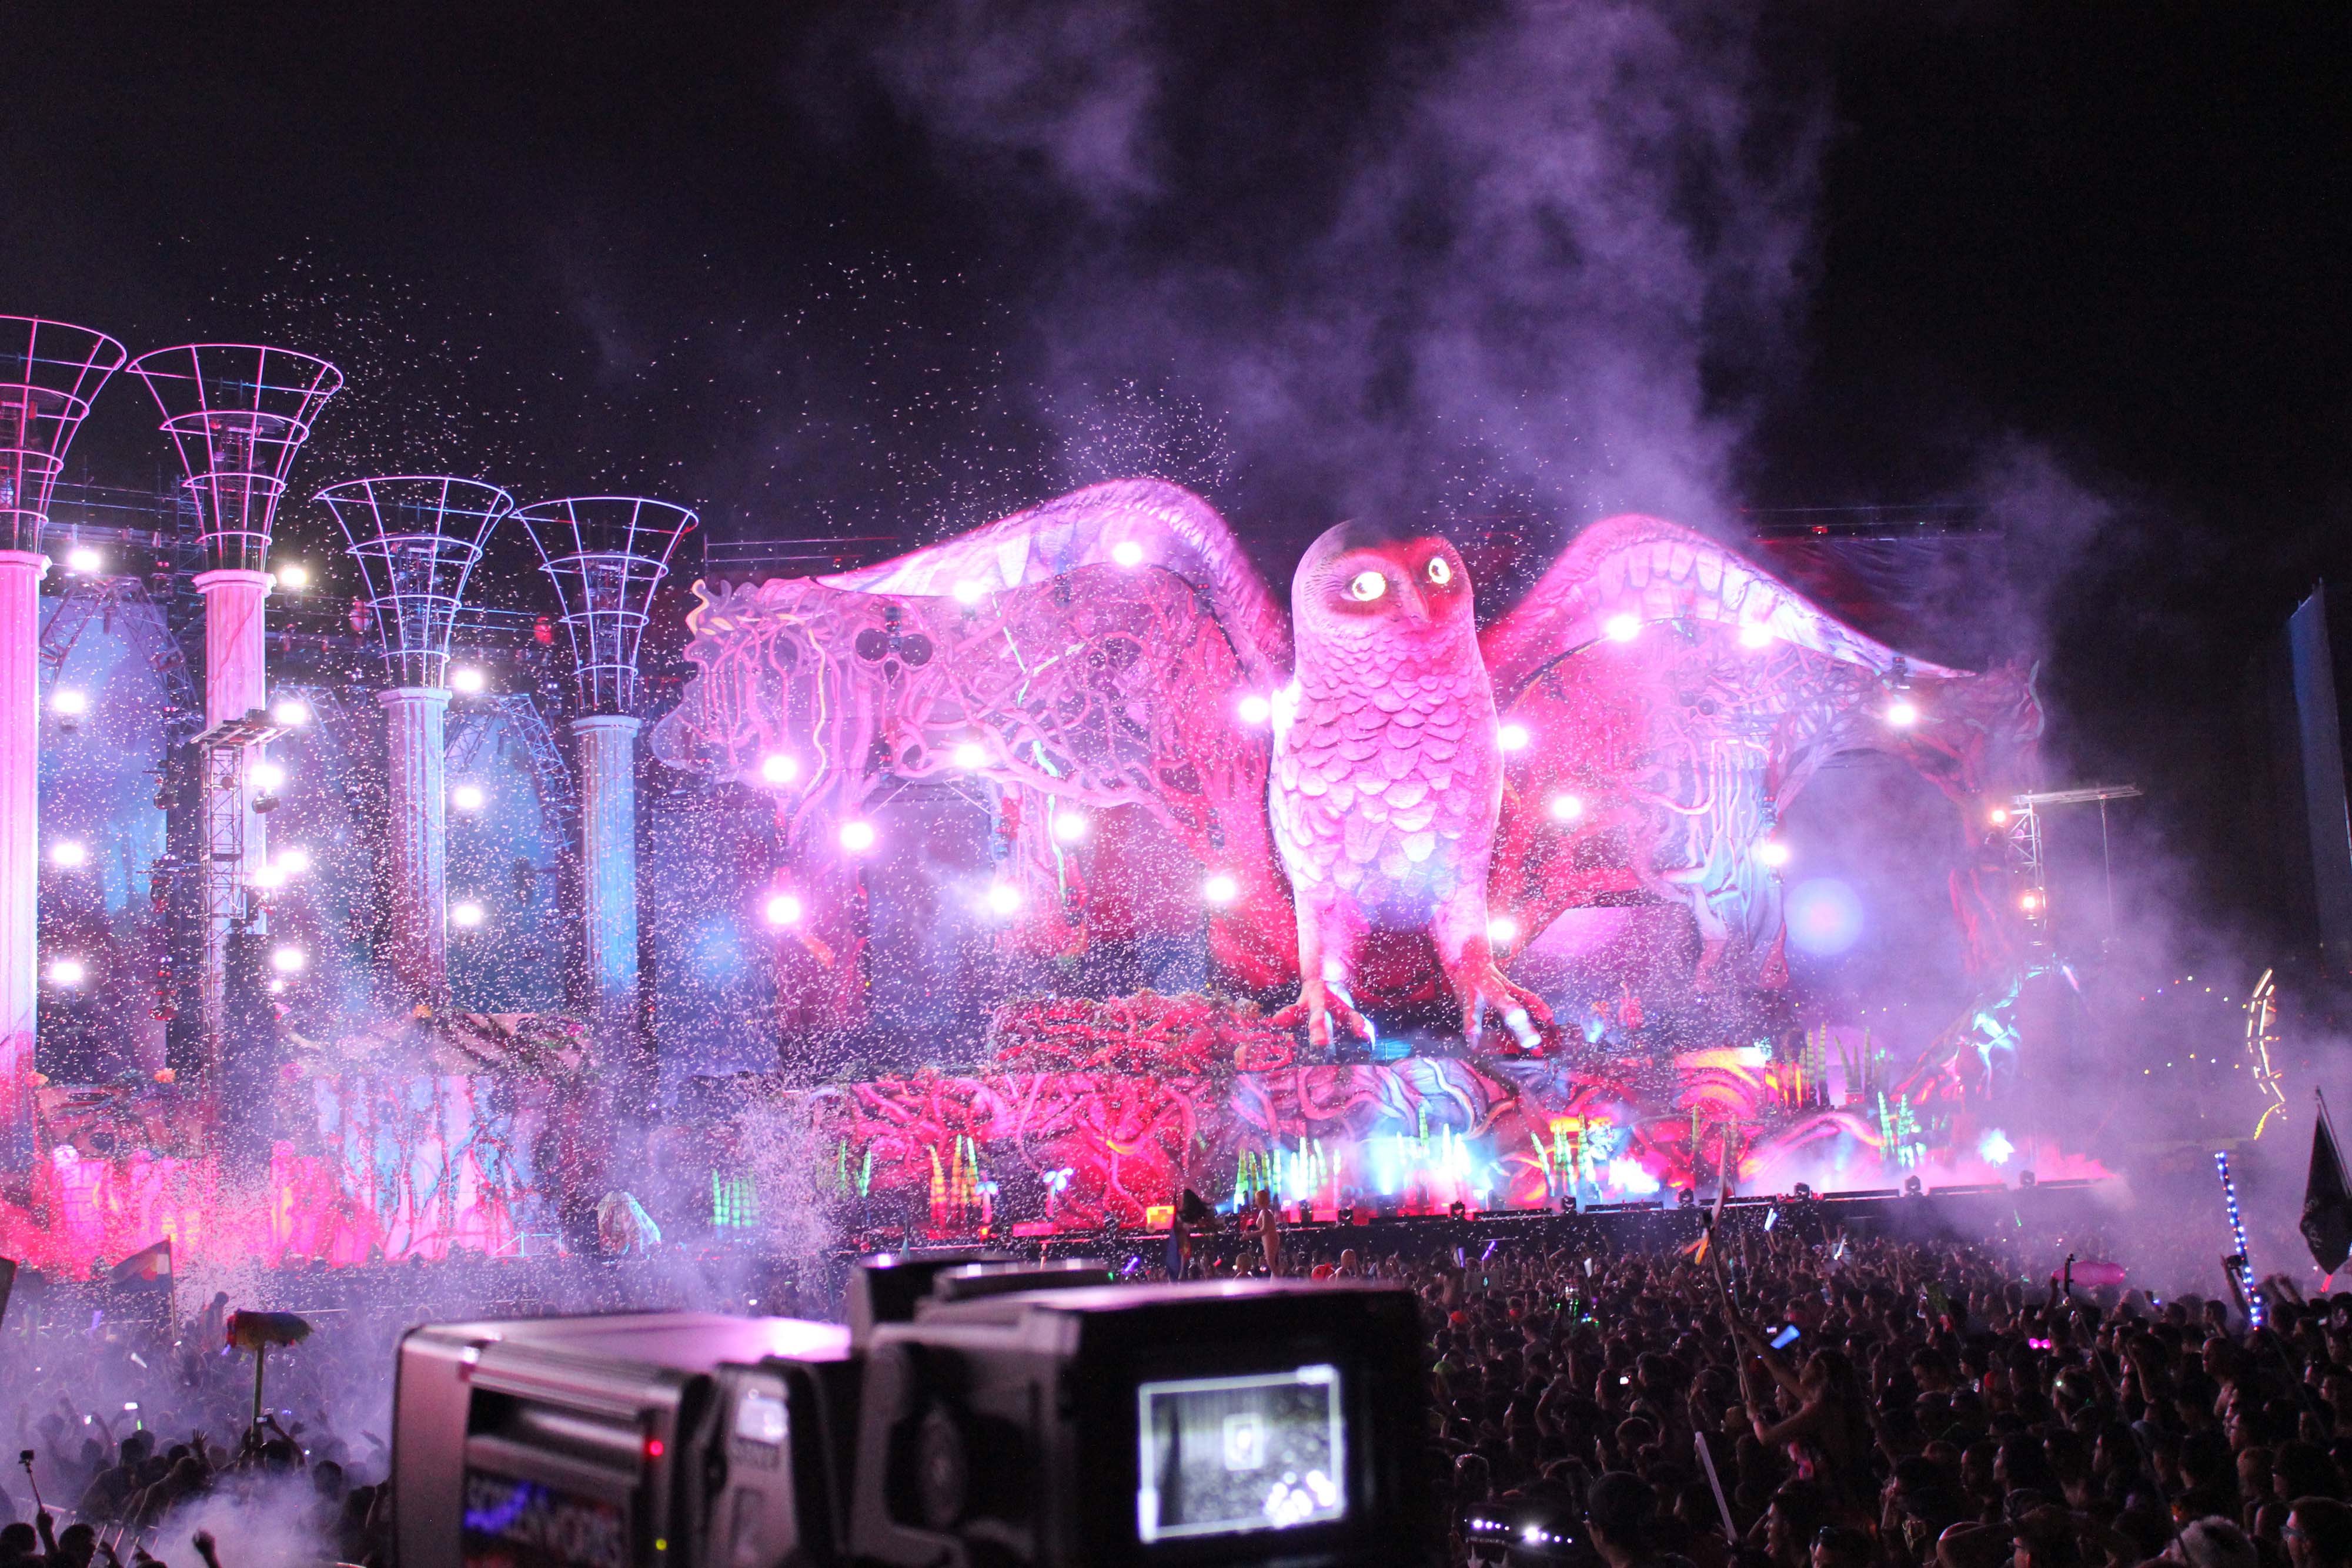 Giant inflatable owl on stage EDC 2014 with crowd